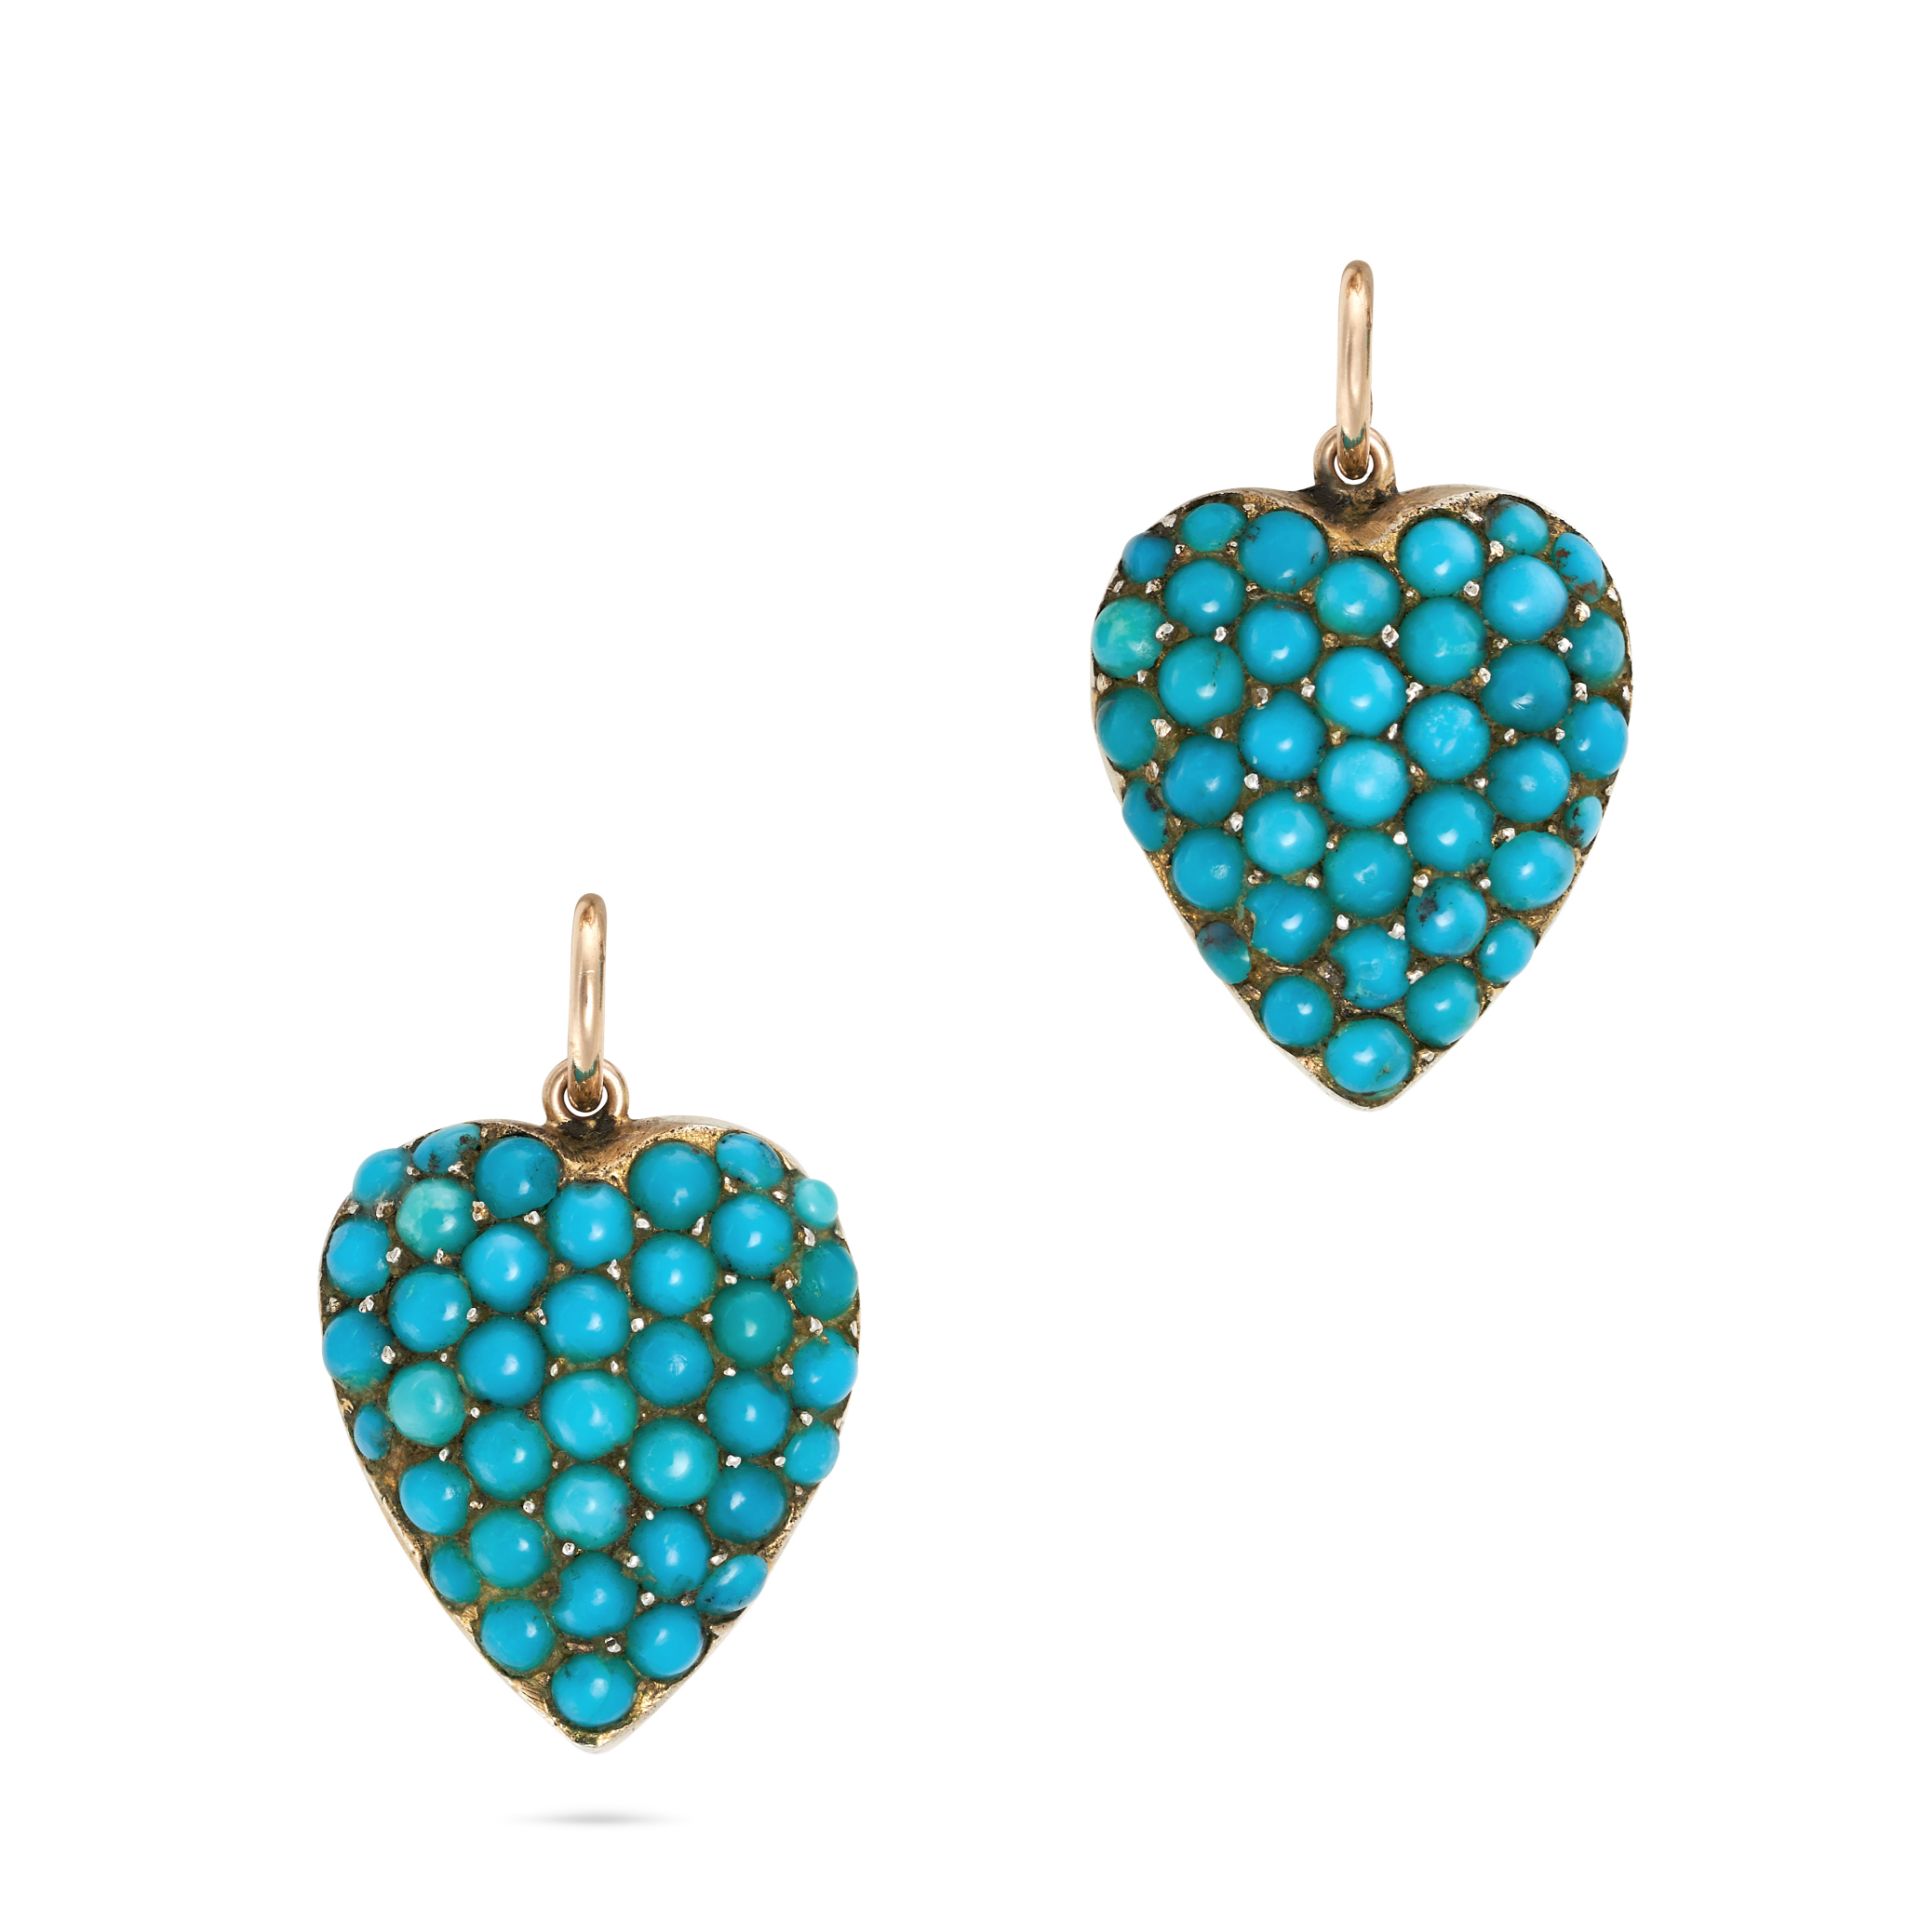 TWO ANTIQUE TURQUOISE HEART PENDANTS / CHARMS each in identical design, pave set with round caboc...